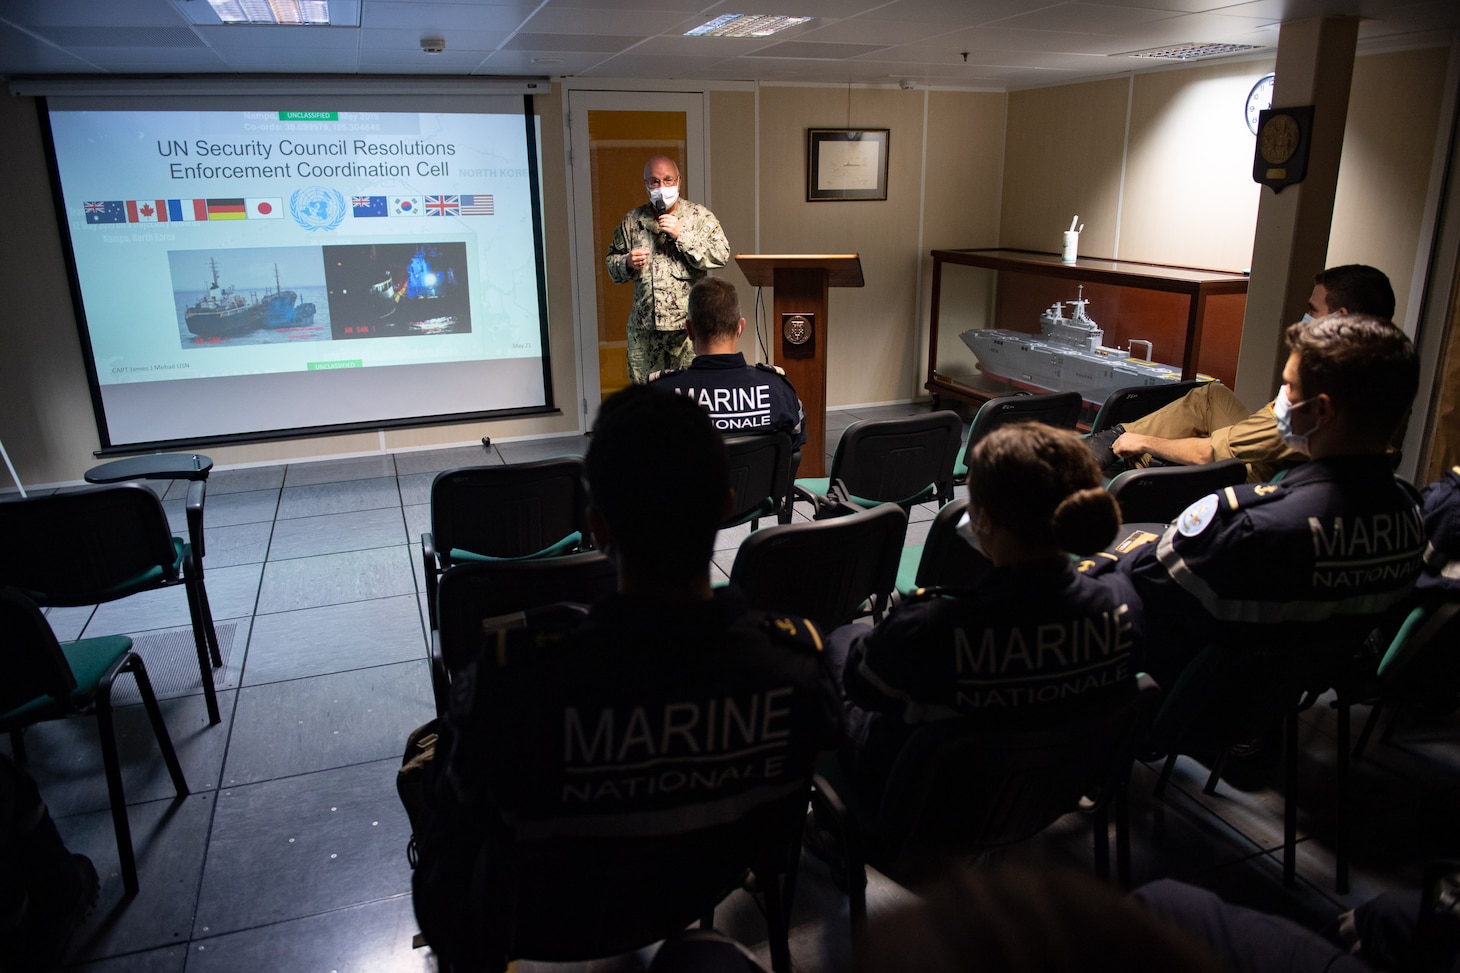 U.S. 7th Fleet's Enforcement Coordination Cell (ECC) director, Capt. James J. Mehail, provides a lecture to midships aboard FS Tonnerre (L9014). As the U.S. Navy's largest forward-deployed fleet, 7th Fleet employs 50-70 ships and submarines across the Western Pacific and Indian oceans. U.S. 7th Fleet routinely operates and interacts with 35 maritime nations while conducting missions to preserve and protect a free and open Indo-Pacific Region.